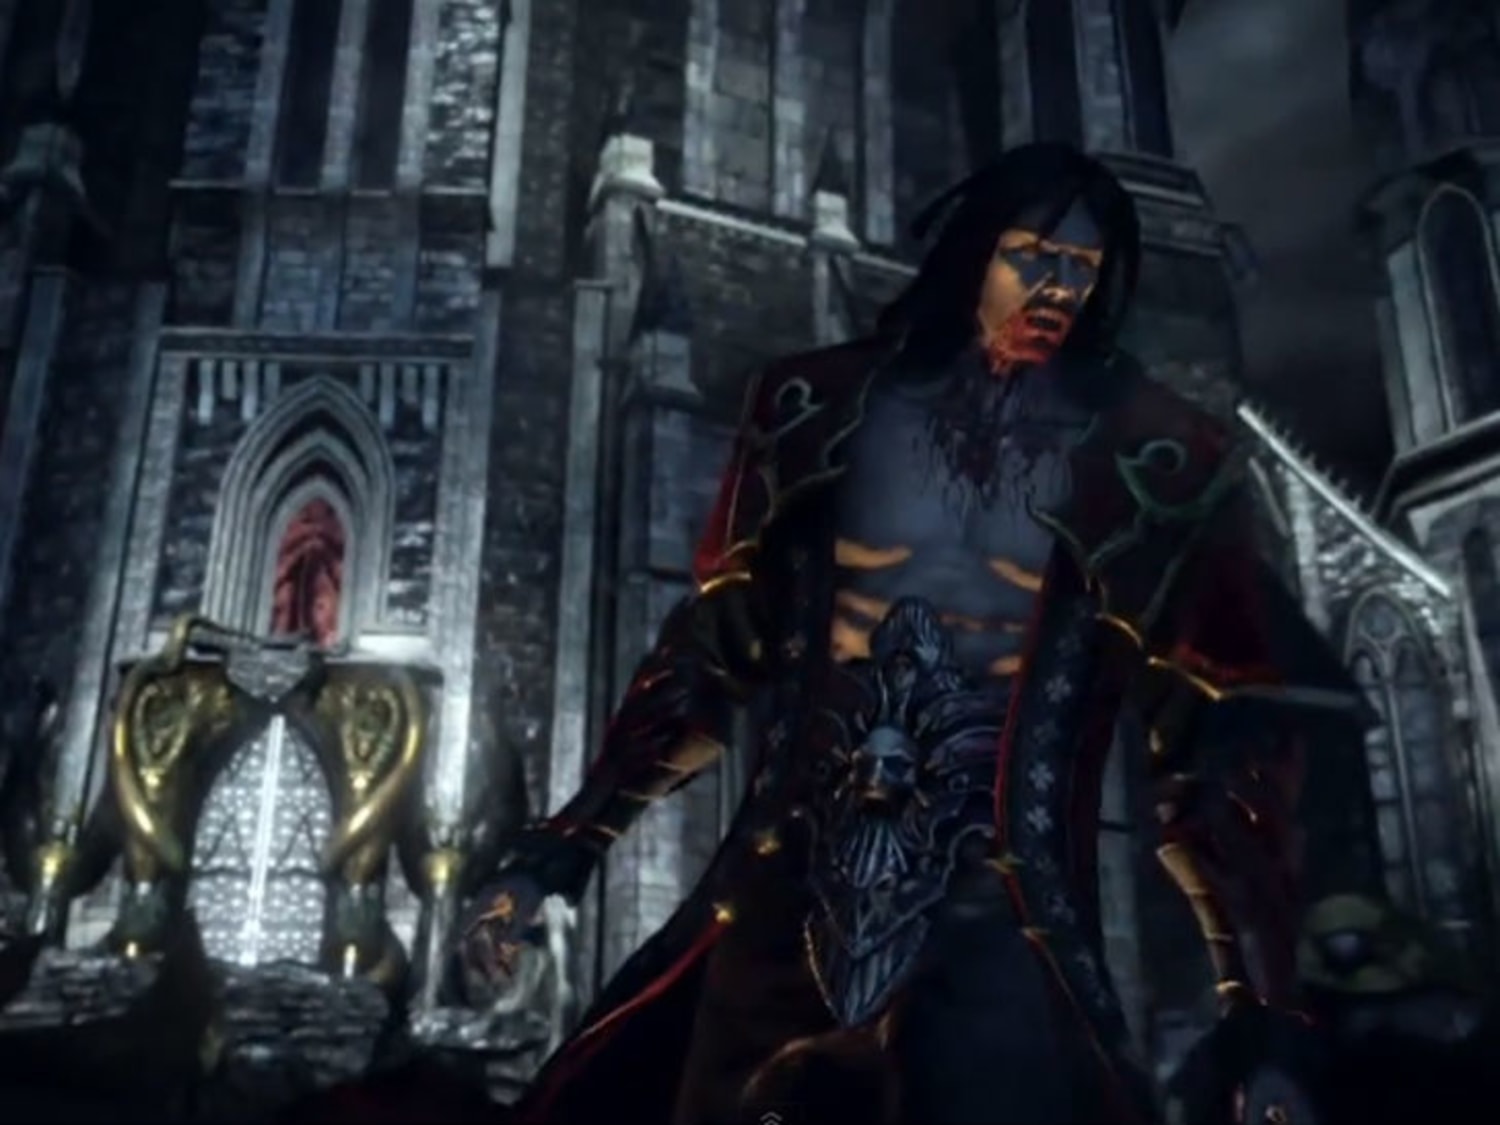 Images Castlevania Castlevania: Lords of Shadow vdeo game